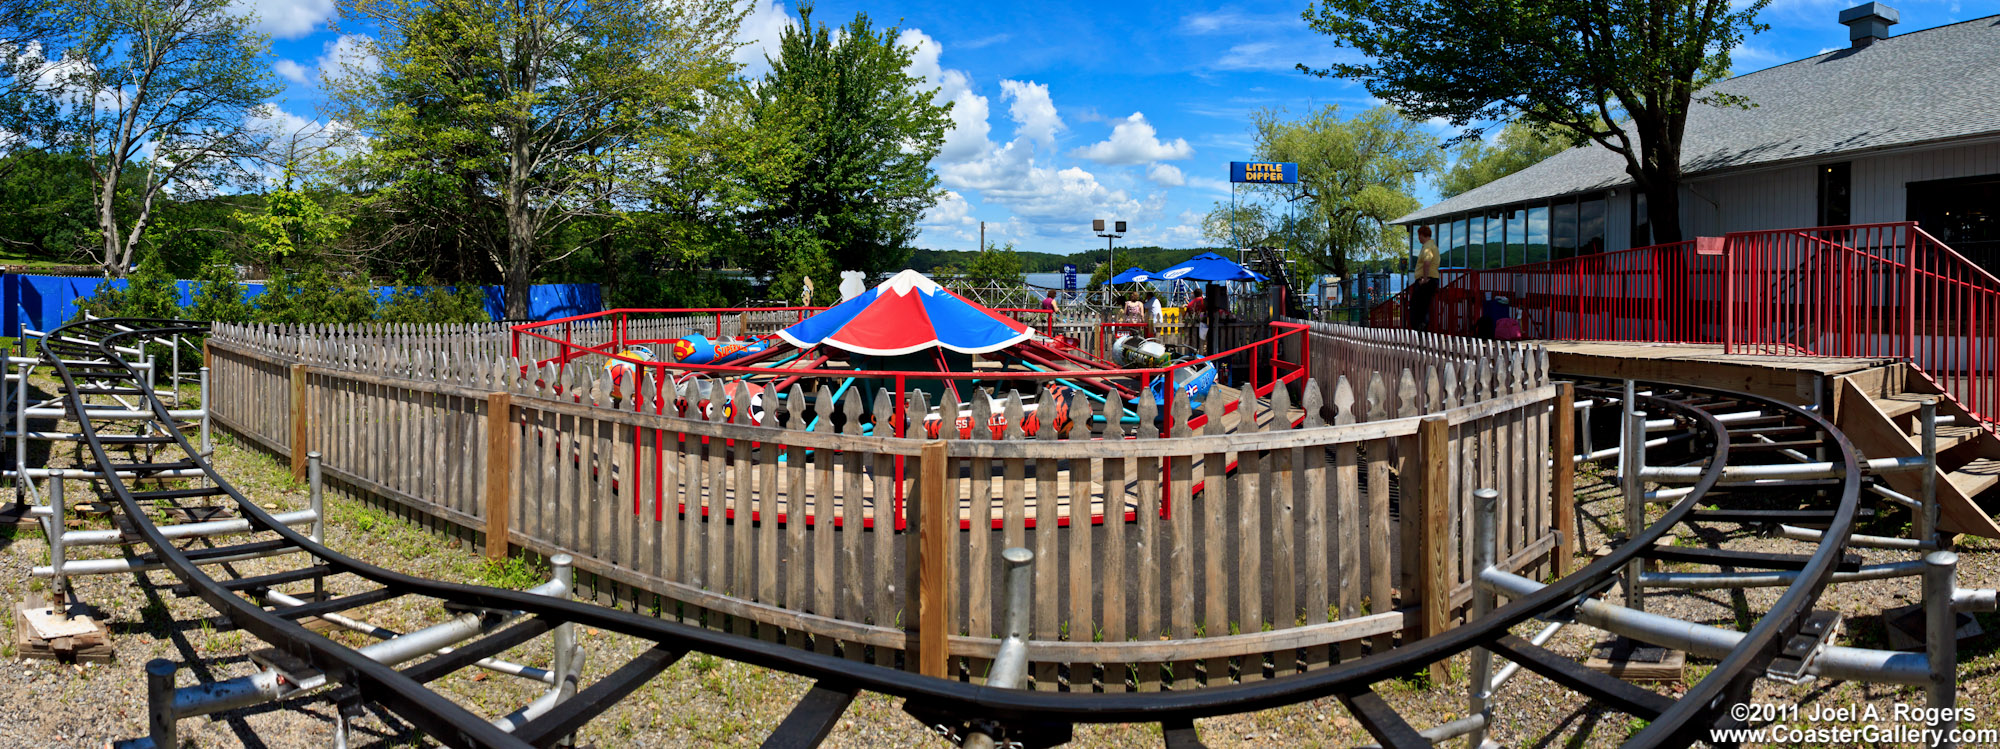 Little Dipper roller coaster panoramic image